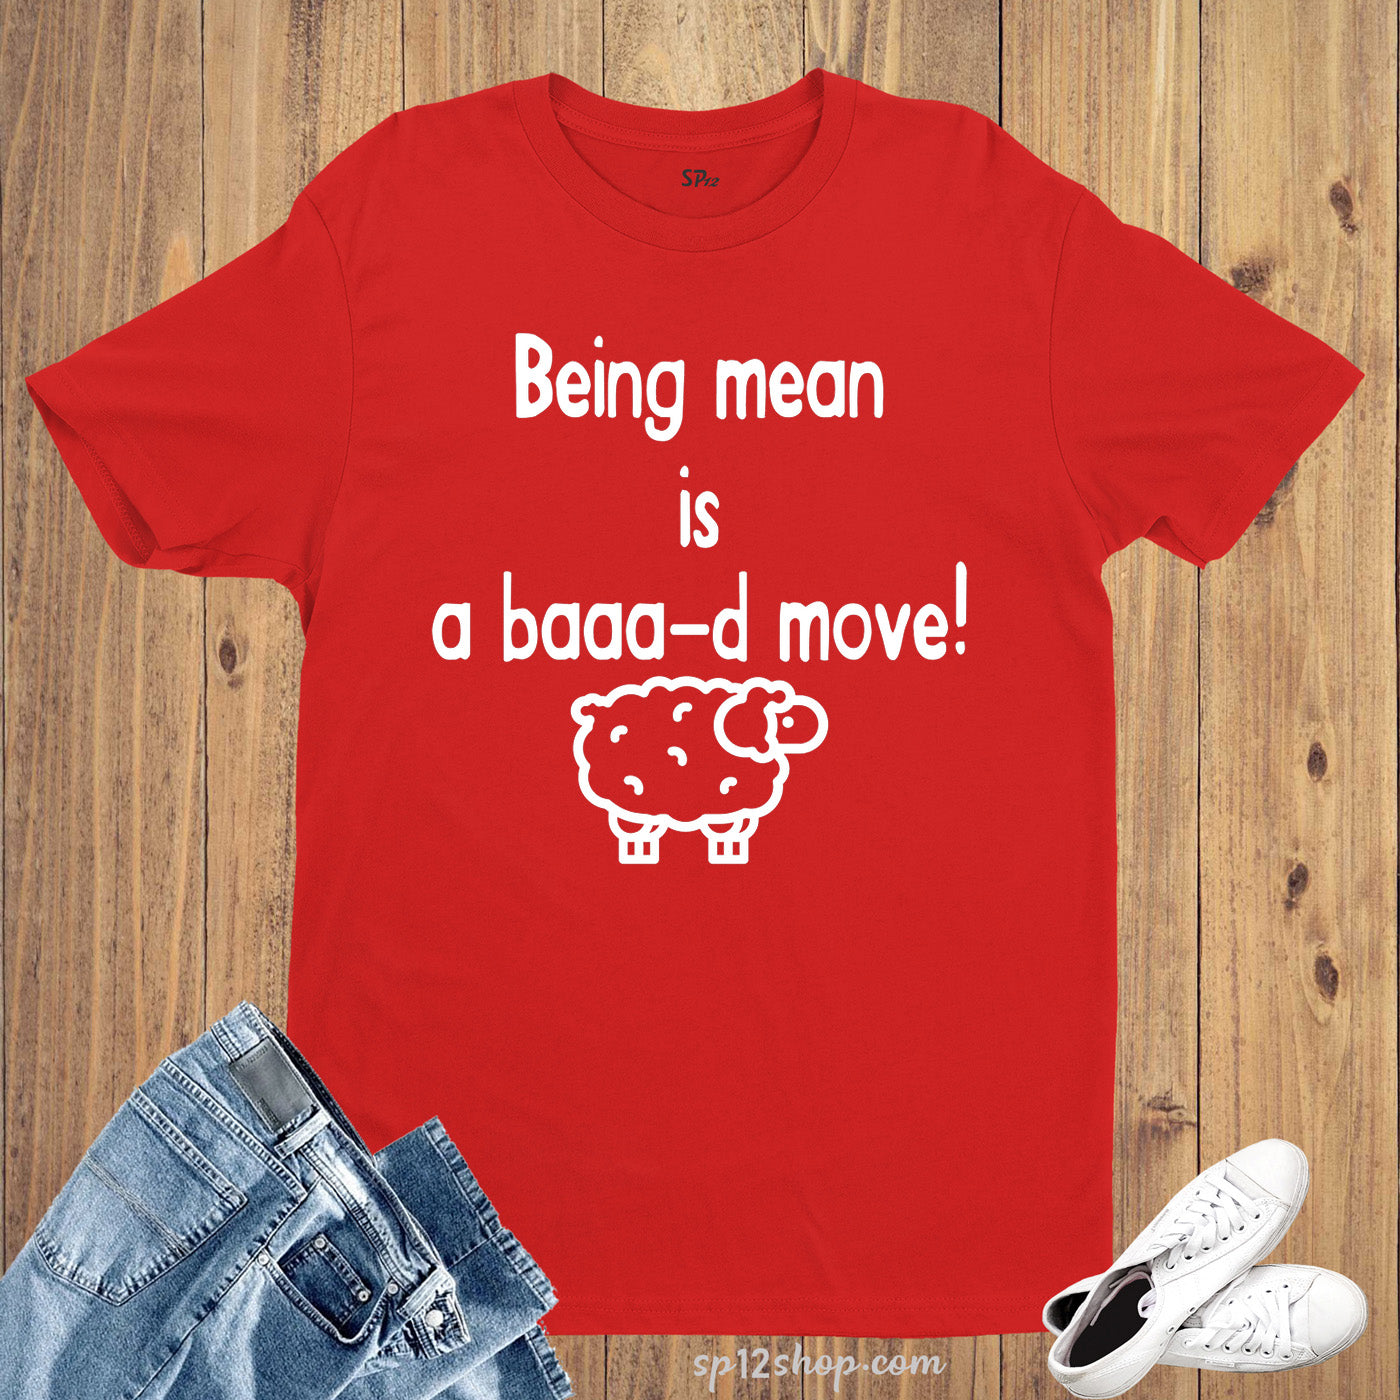 Being Mean is Bad Move Slogan T shirt